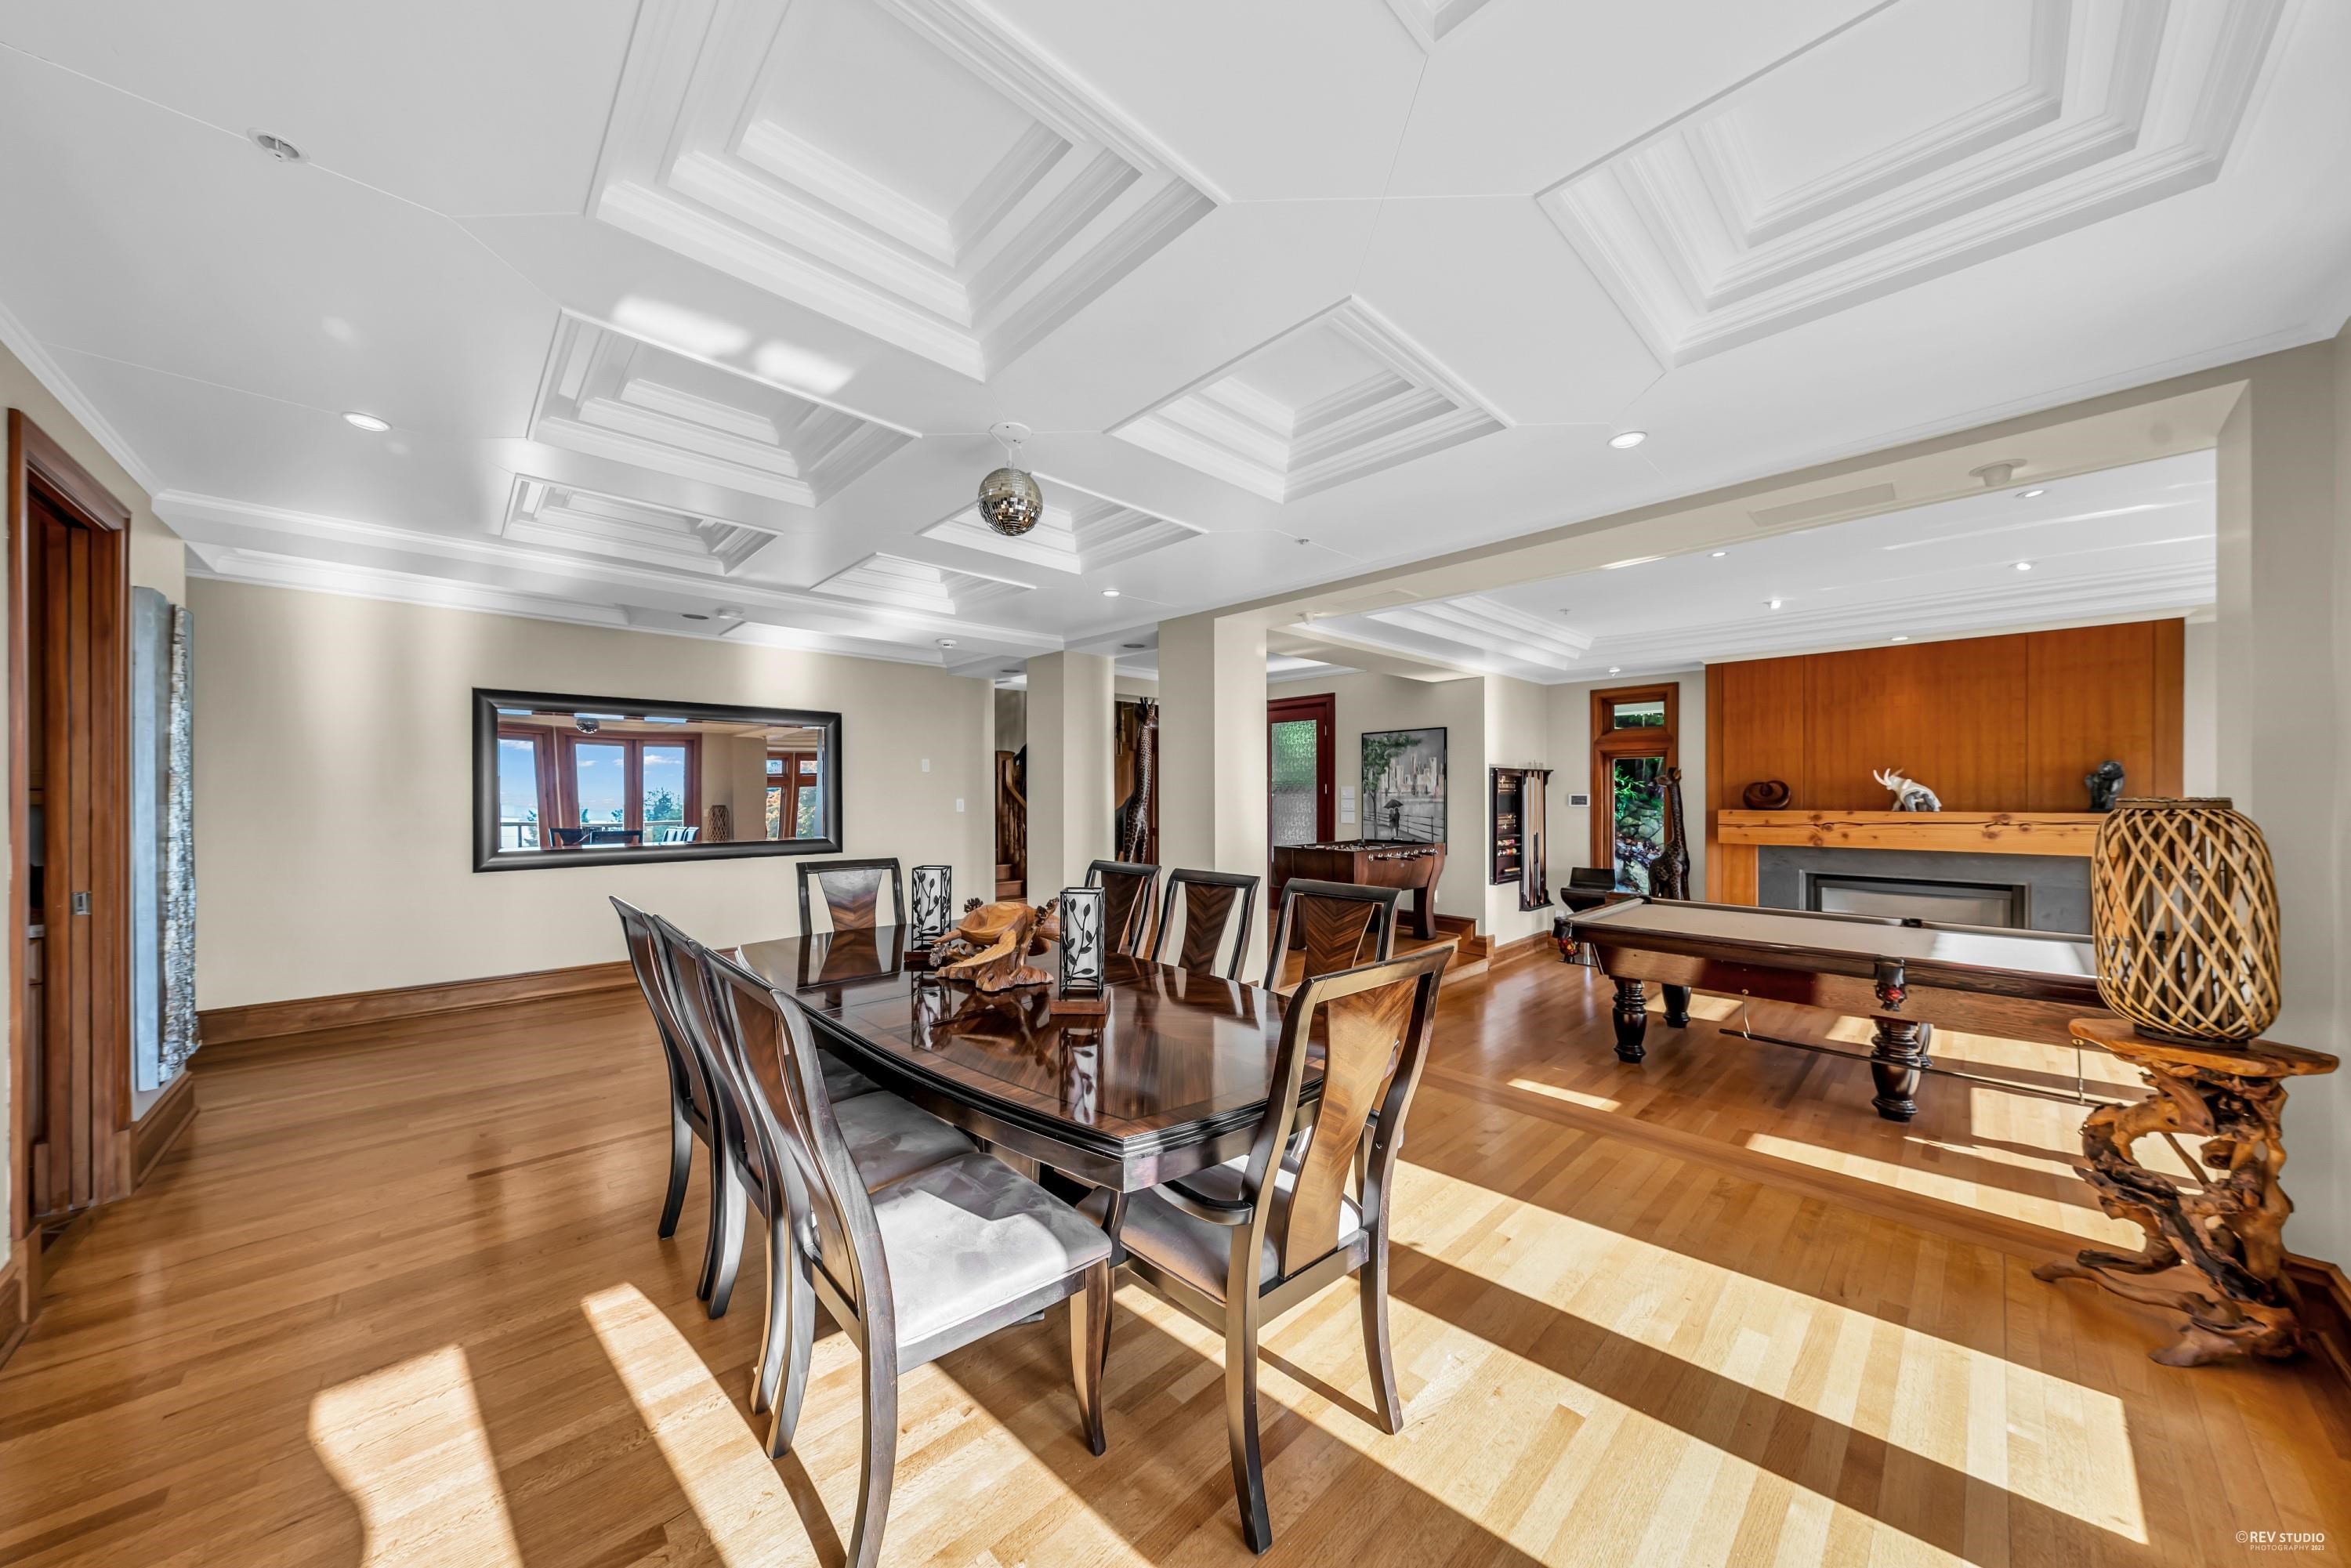 Listing image of 3285 DICKINSON CRESCENT